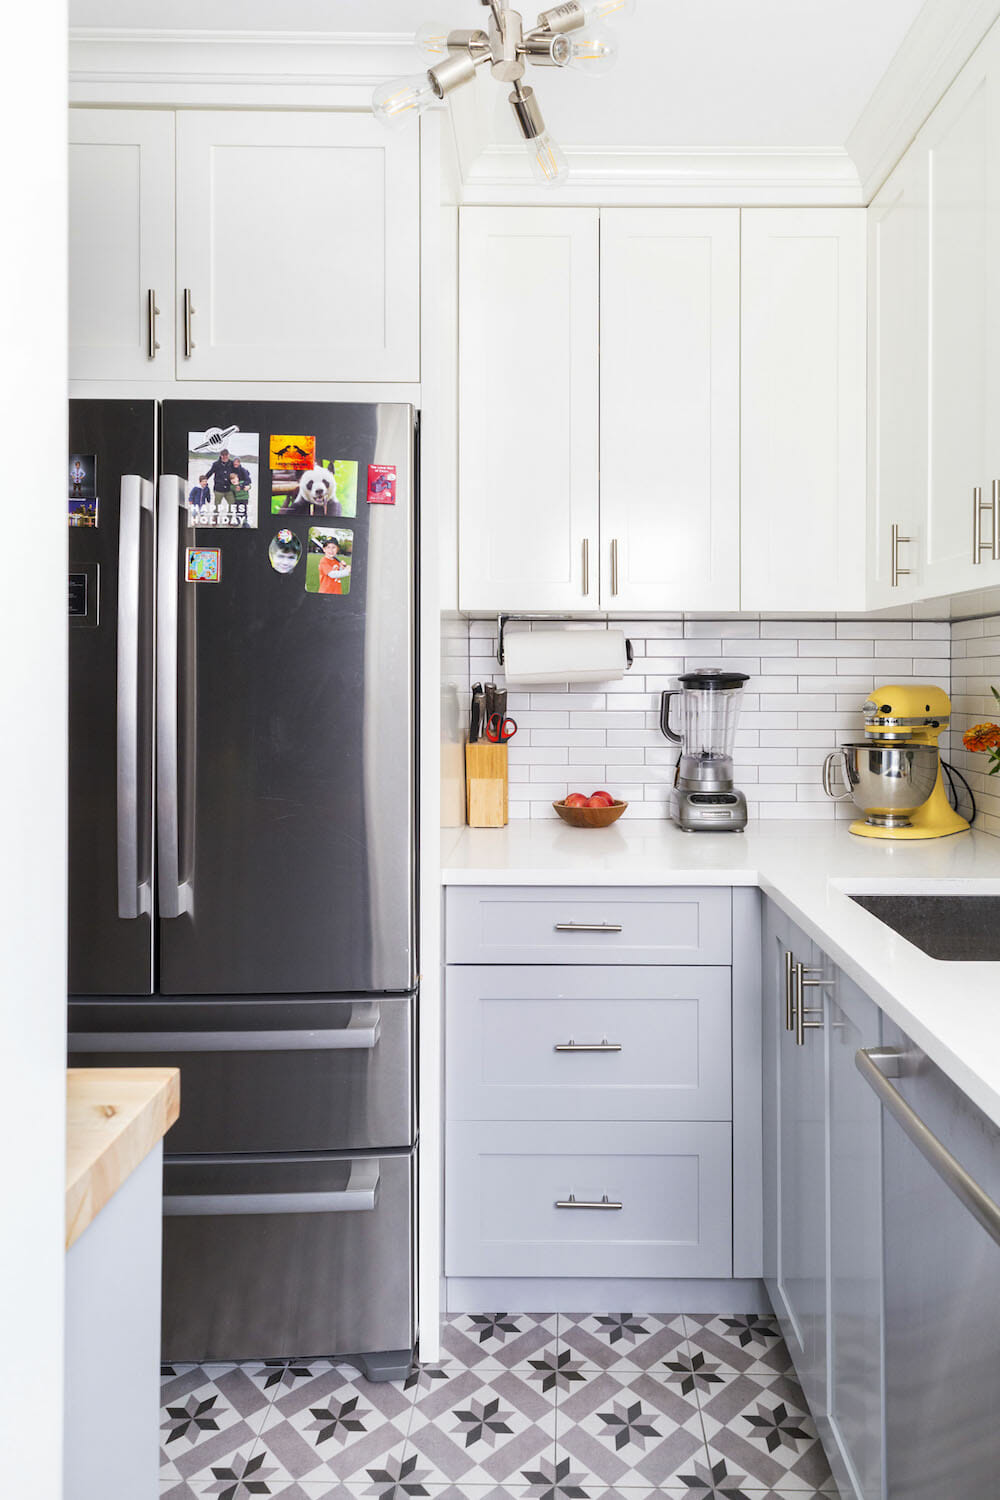 Clinton Hill, Brooklyn, renovation, kitchen, two-tone cabinets, tile floor, kitchen trends 2019